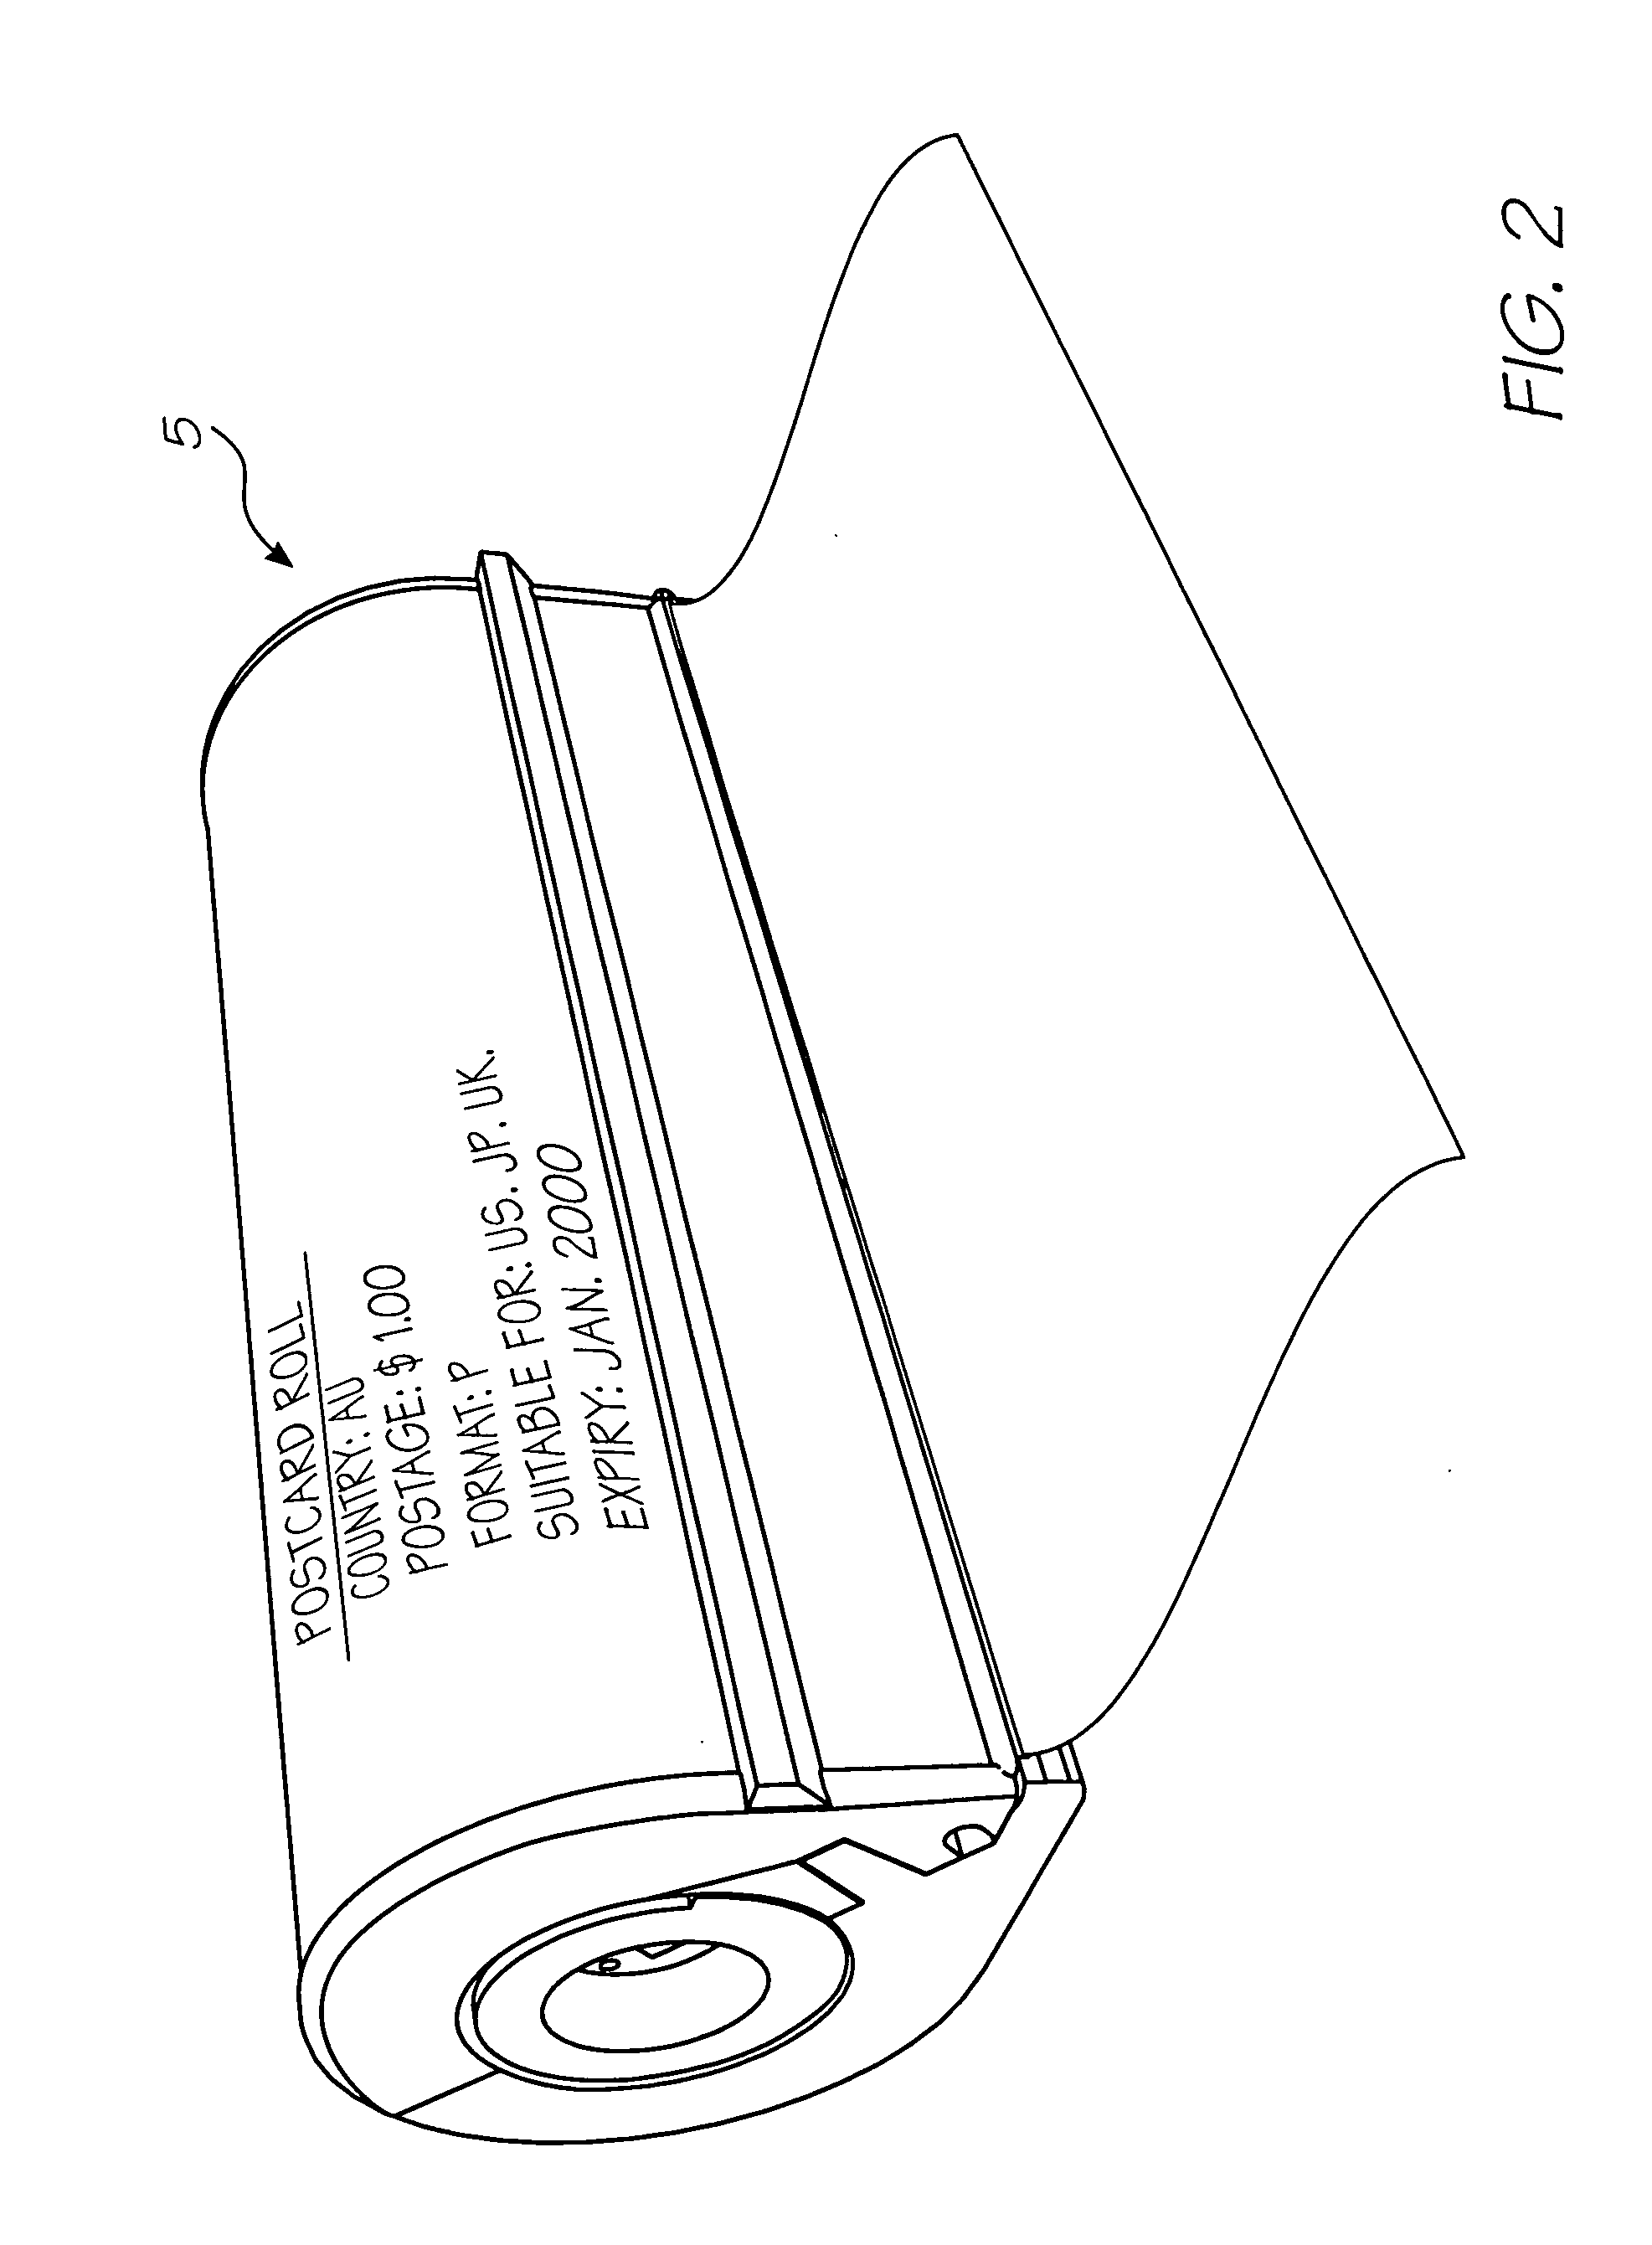 Inkjet cartridge with ink reservoir core and releasable housing